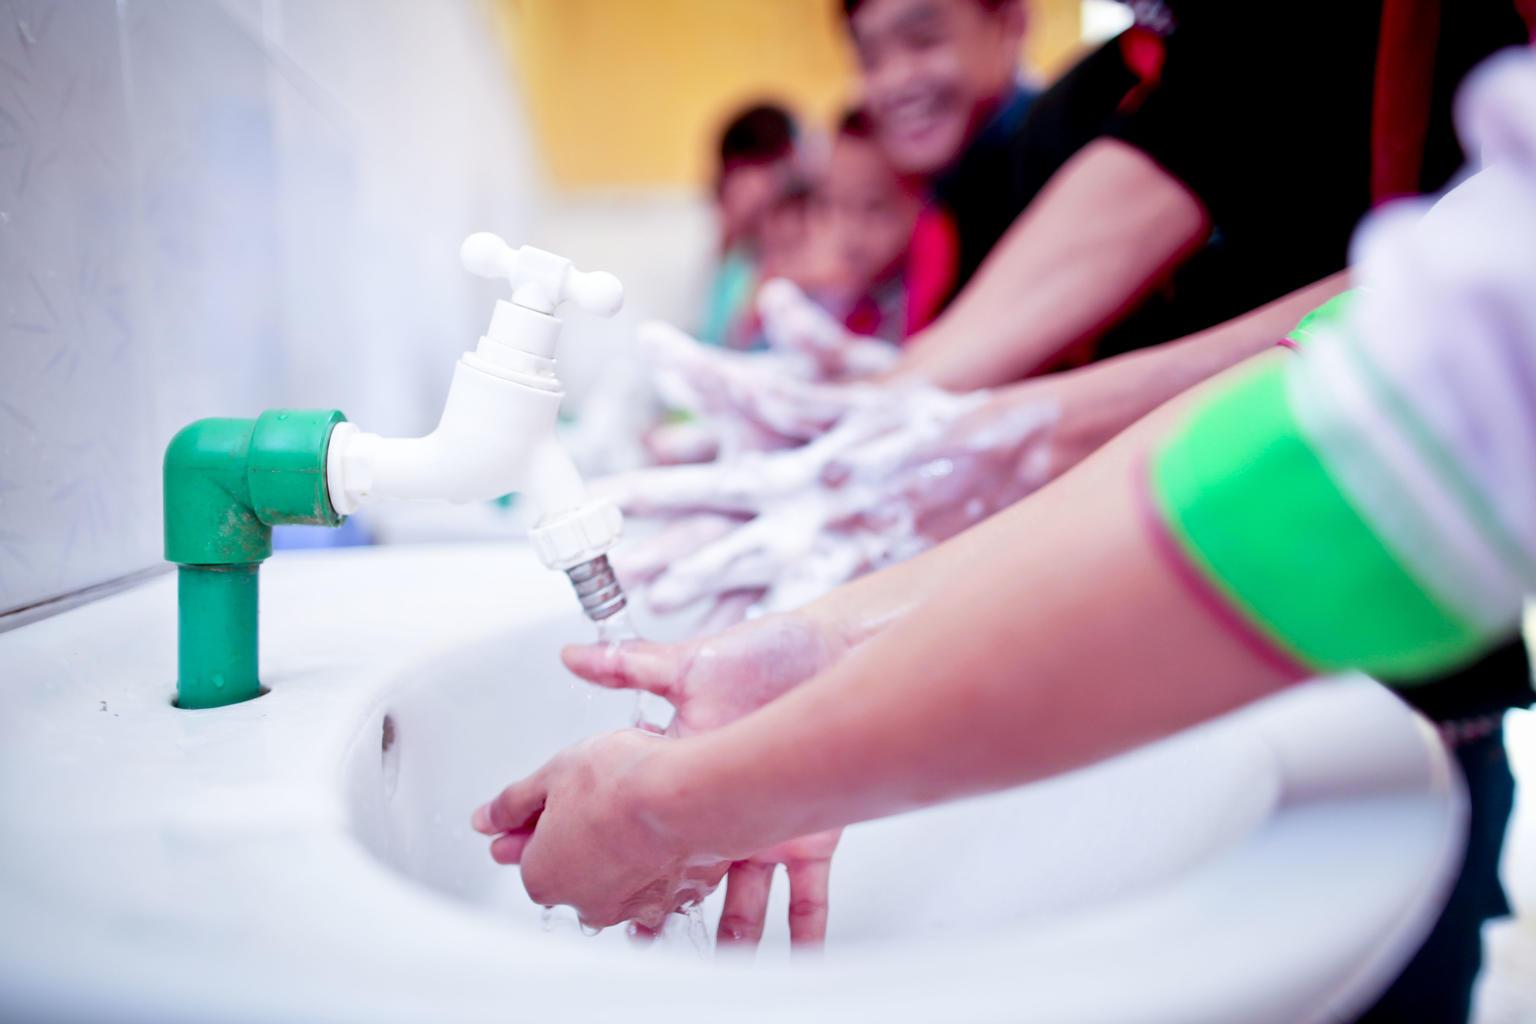 2 in 5 schools around the world lacked basic handwashing facilities prior to COVID-19 pandemic — UNICEF, WHO